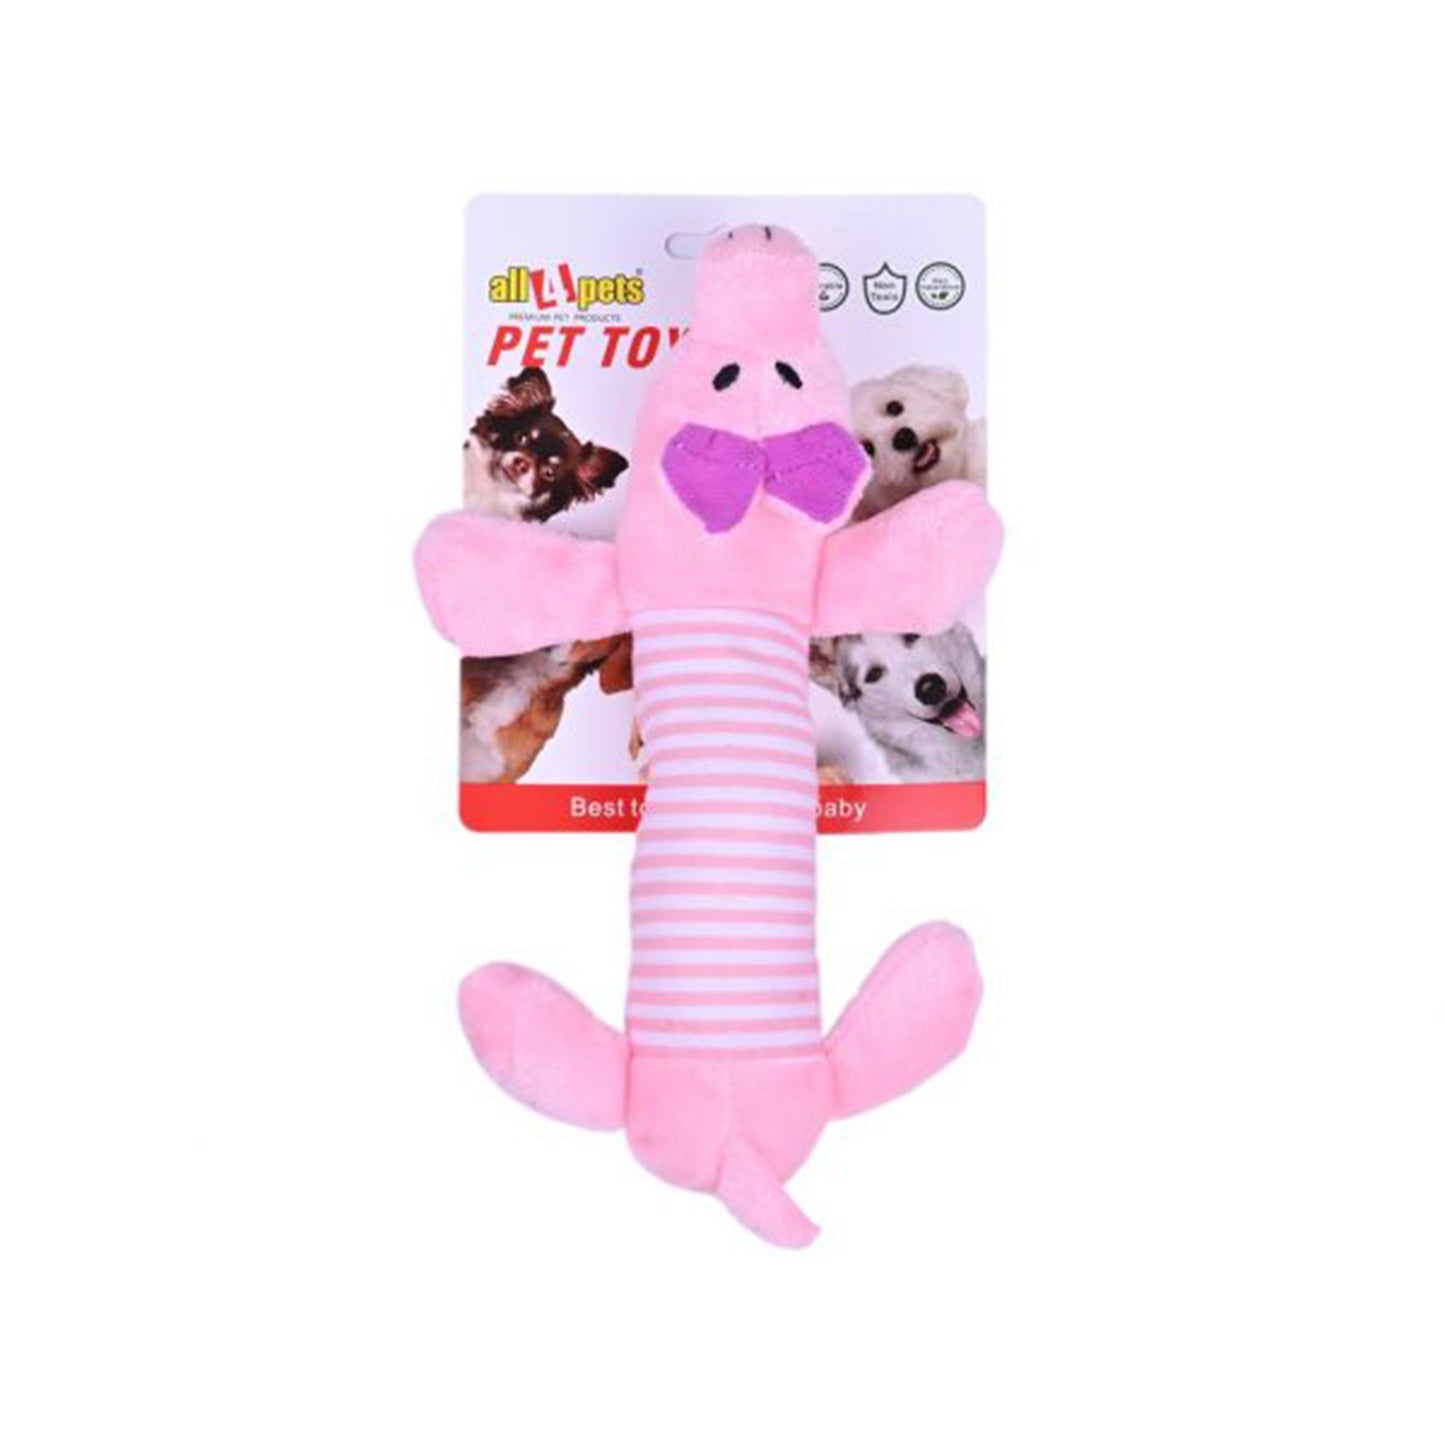 All4pets - Plush Toy for Dogs